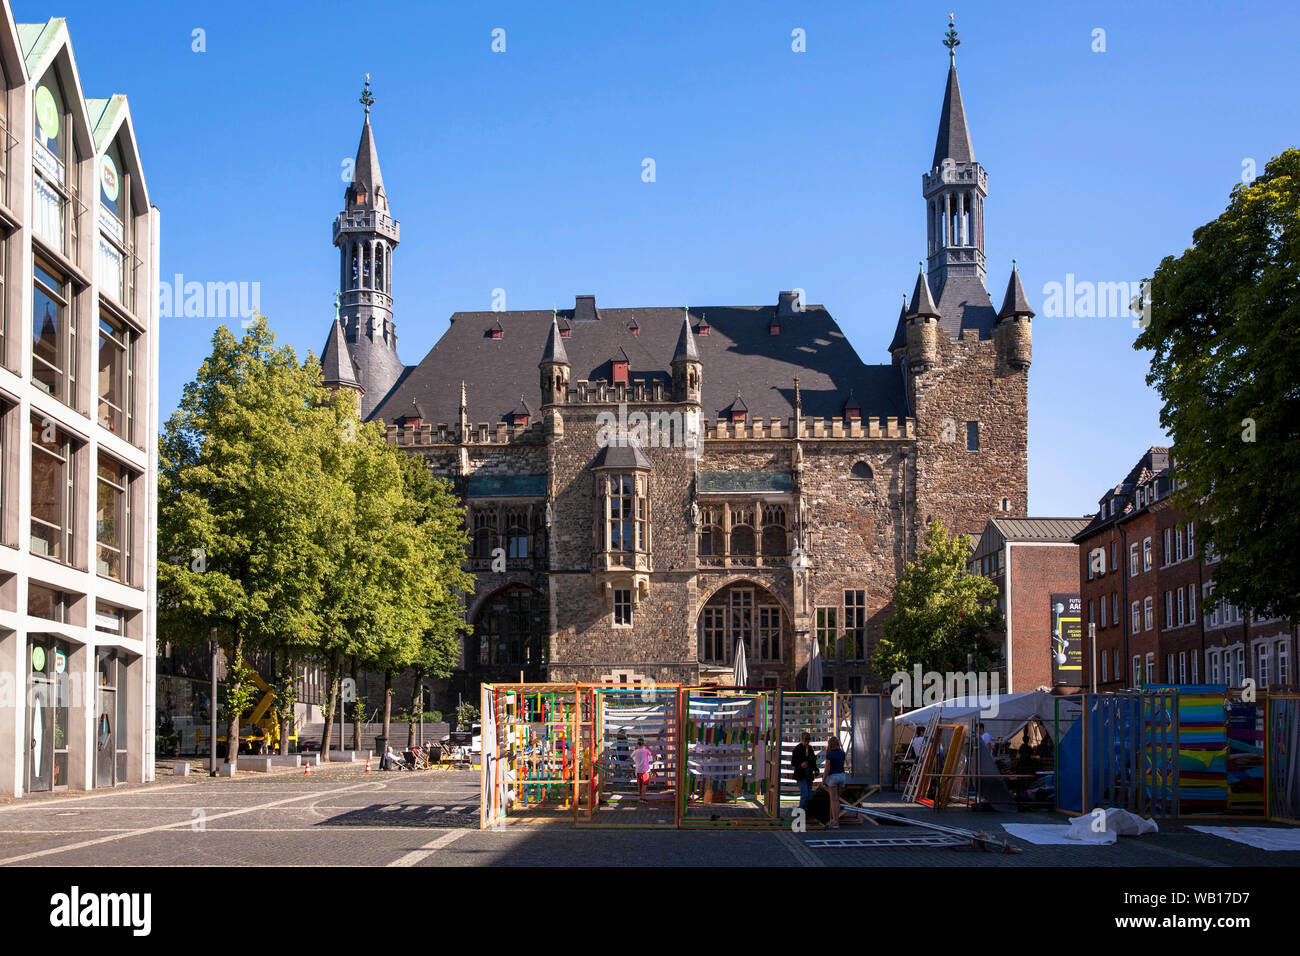 the back of the town hall seen from the Katschhof, Aachen, North Rhine-Westphalia, Germany.  die Rueckseite des Rathauses am Katschhof, Aachen, Nordrh Stock Photo